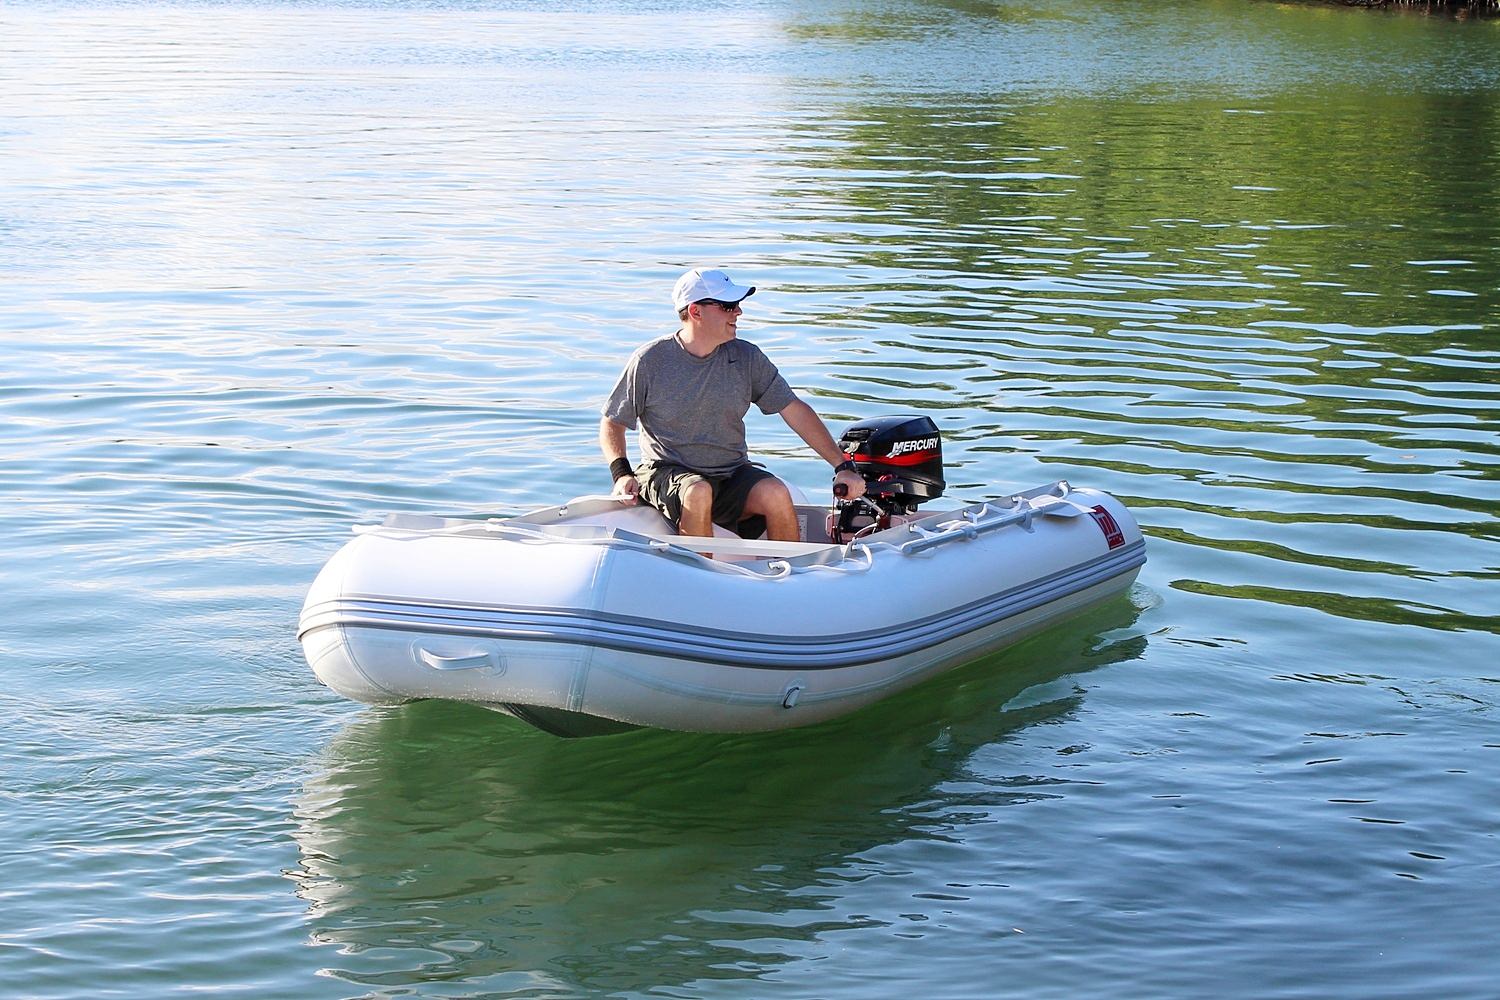 Rafts & Tenders Best Inflatable Boats 8.6' Mars Inflatable Boat made by Saturn 